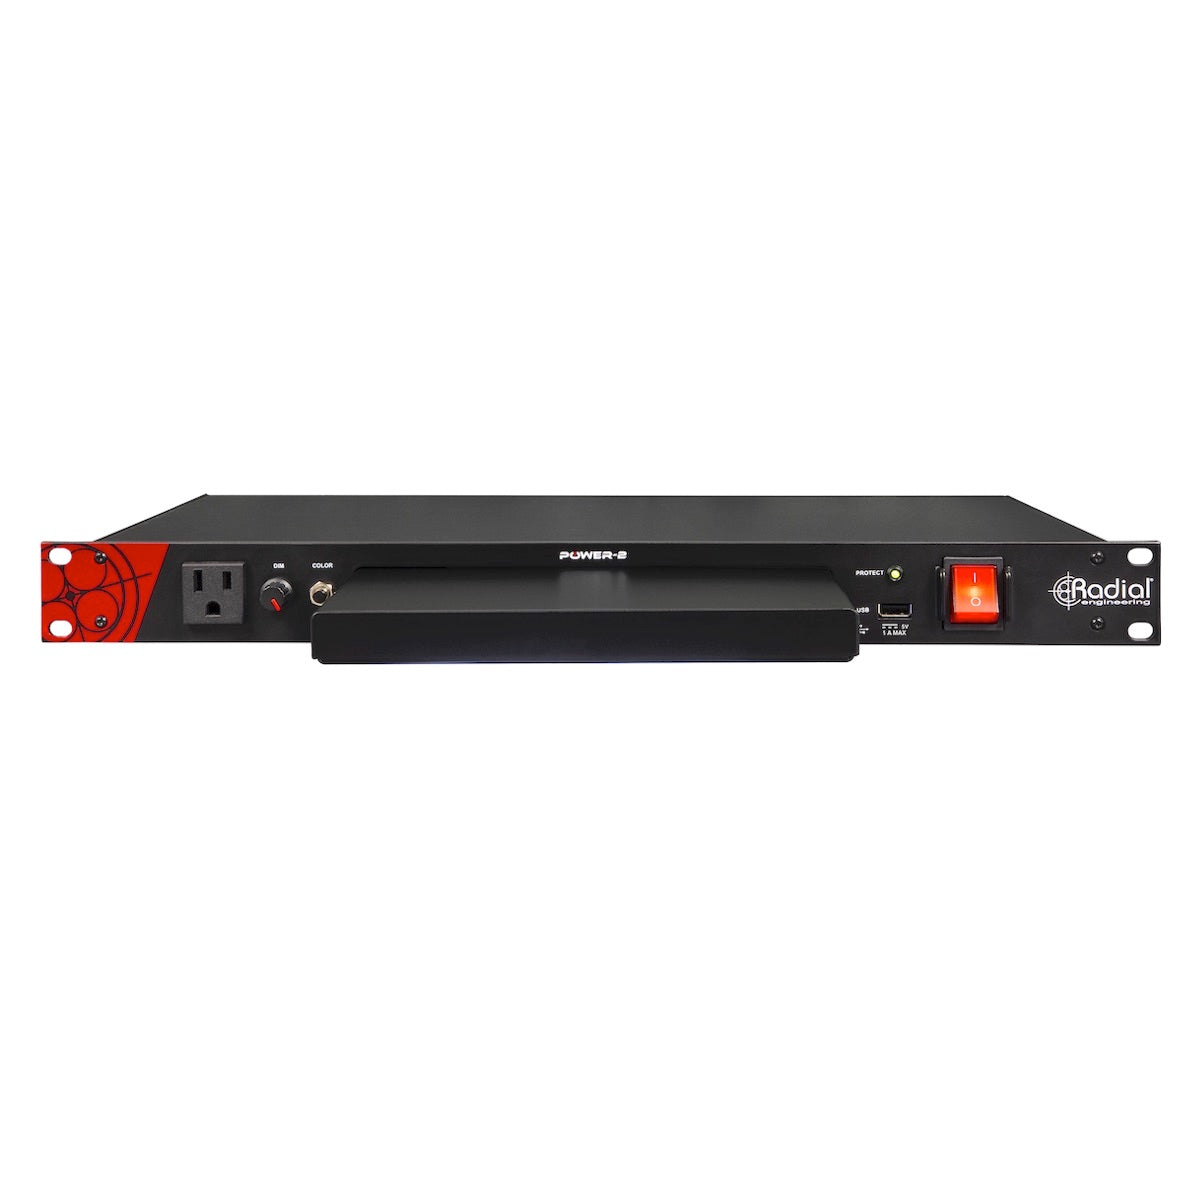 Radial Power-2 Rackmount Power Conditioner Surge Suppressor with LED Lighting, front with tray out